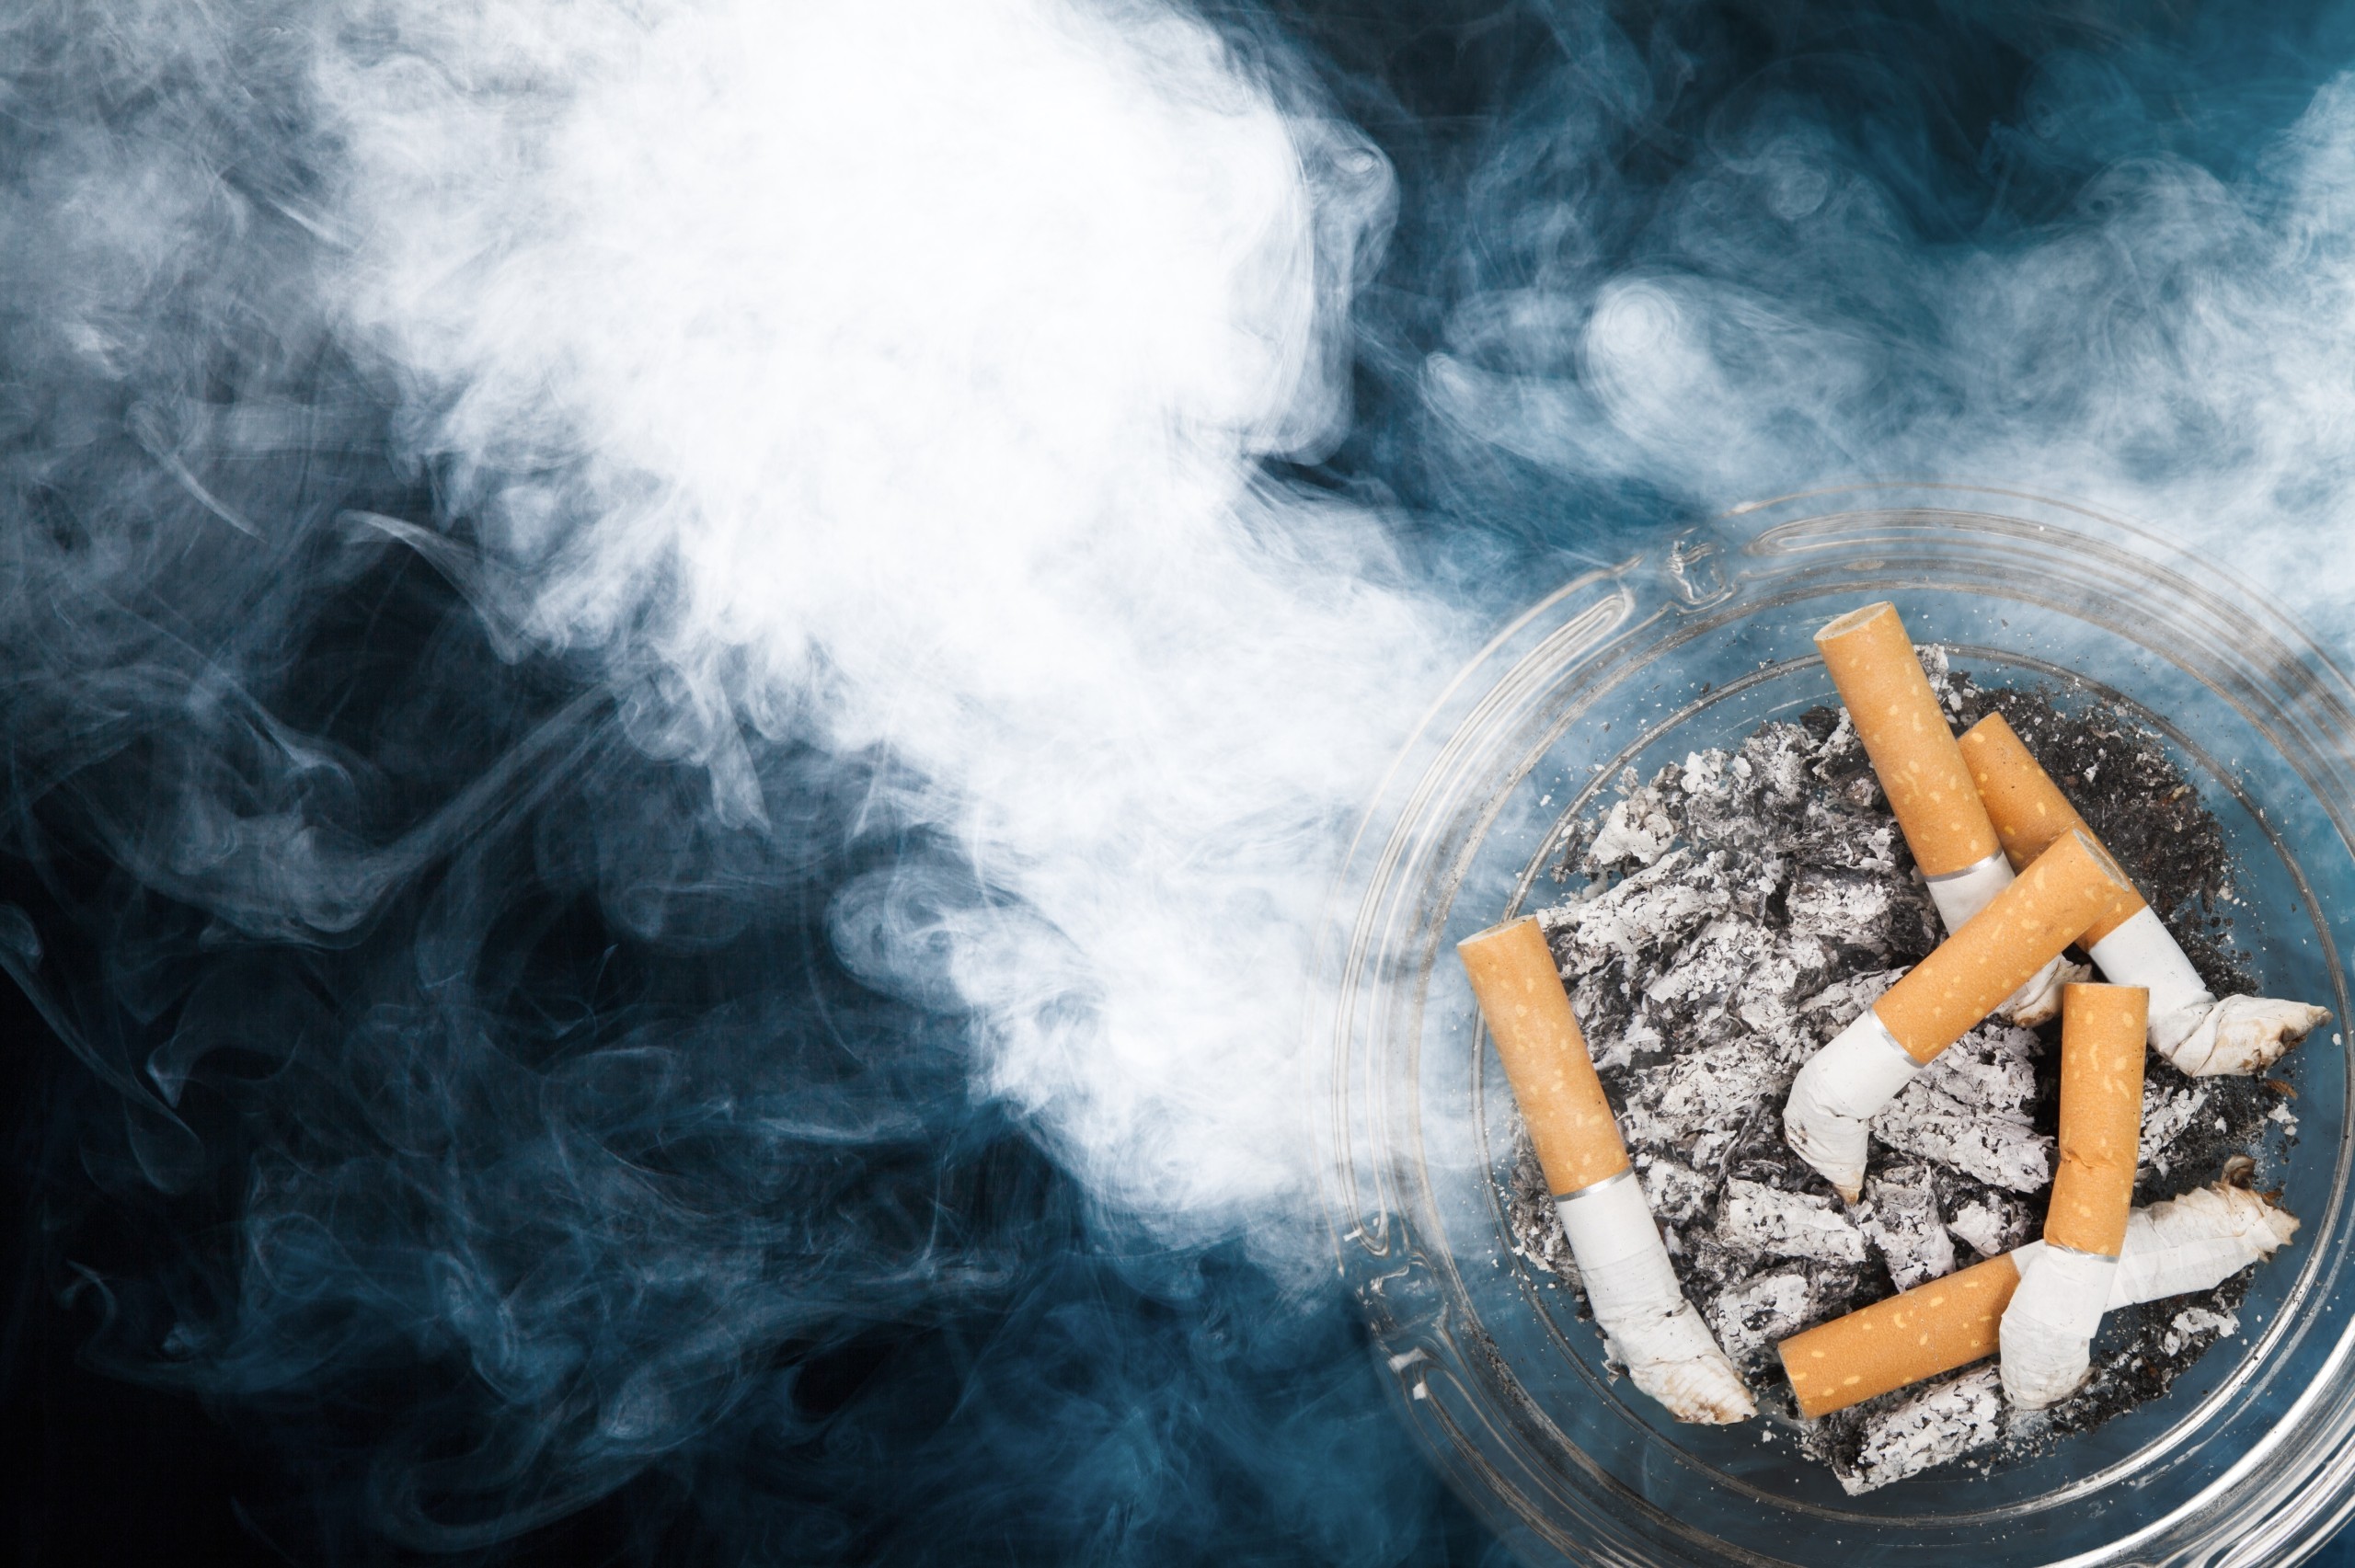 Can Exposure to Secondhand Smoke Cause Lung Cancer?